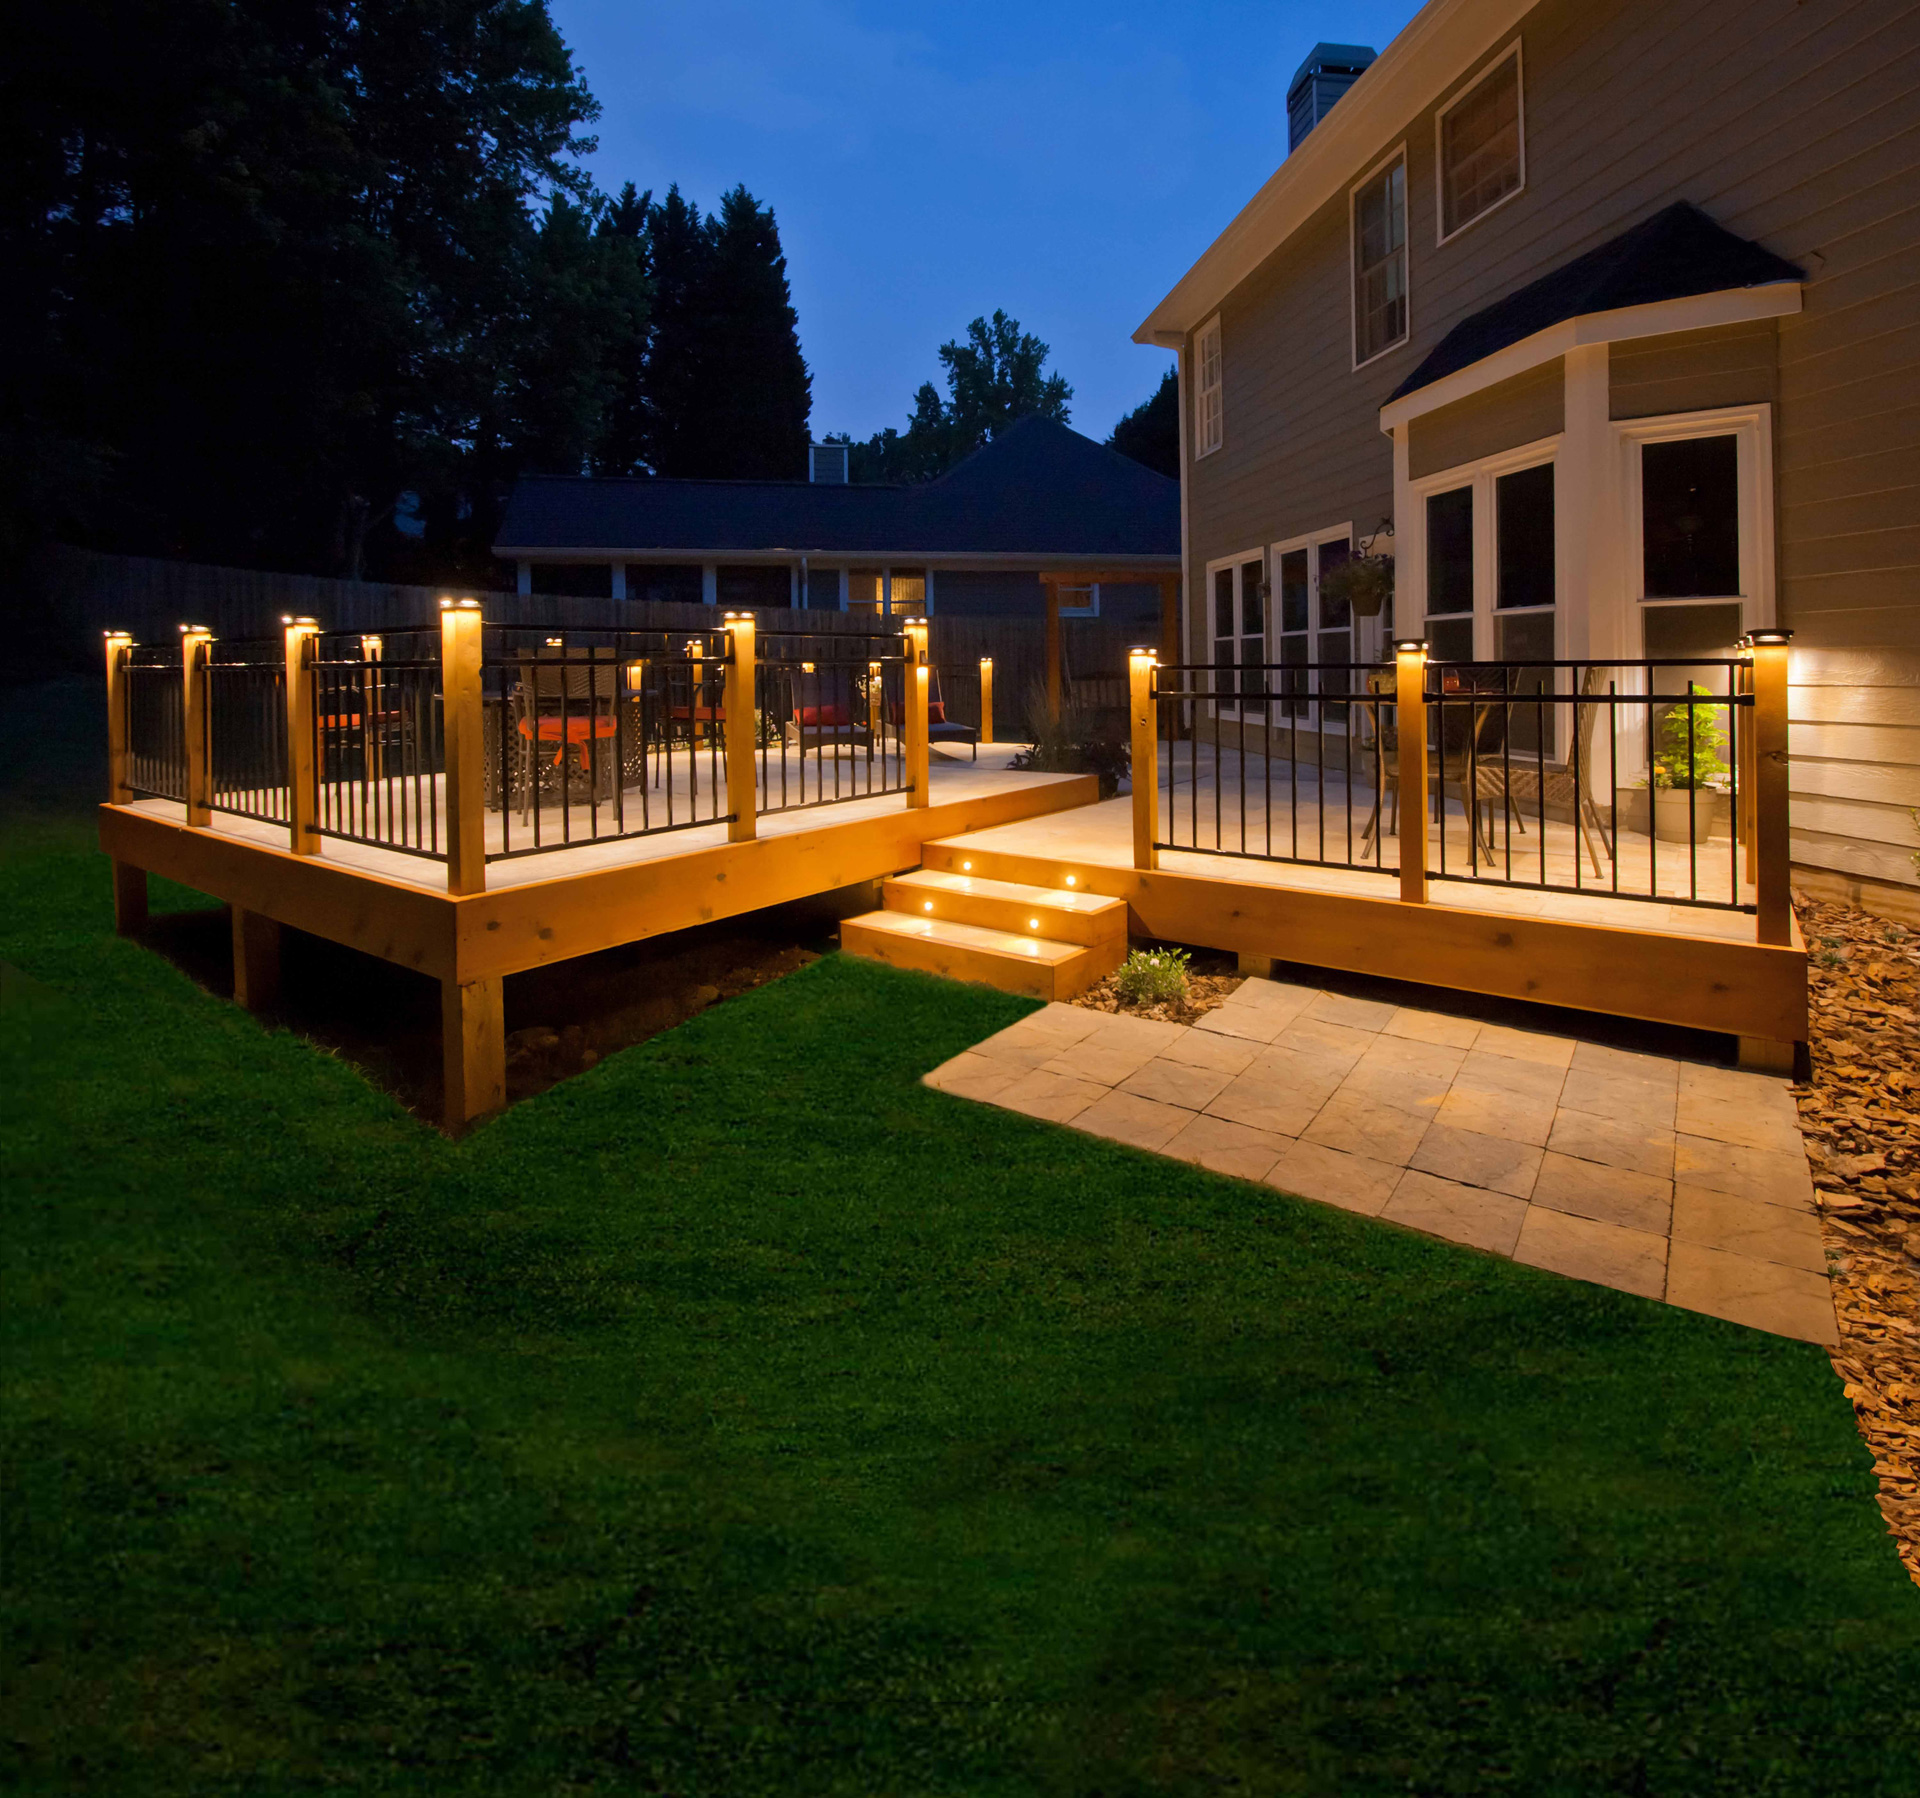 Deck lit up with deck lights at night